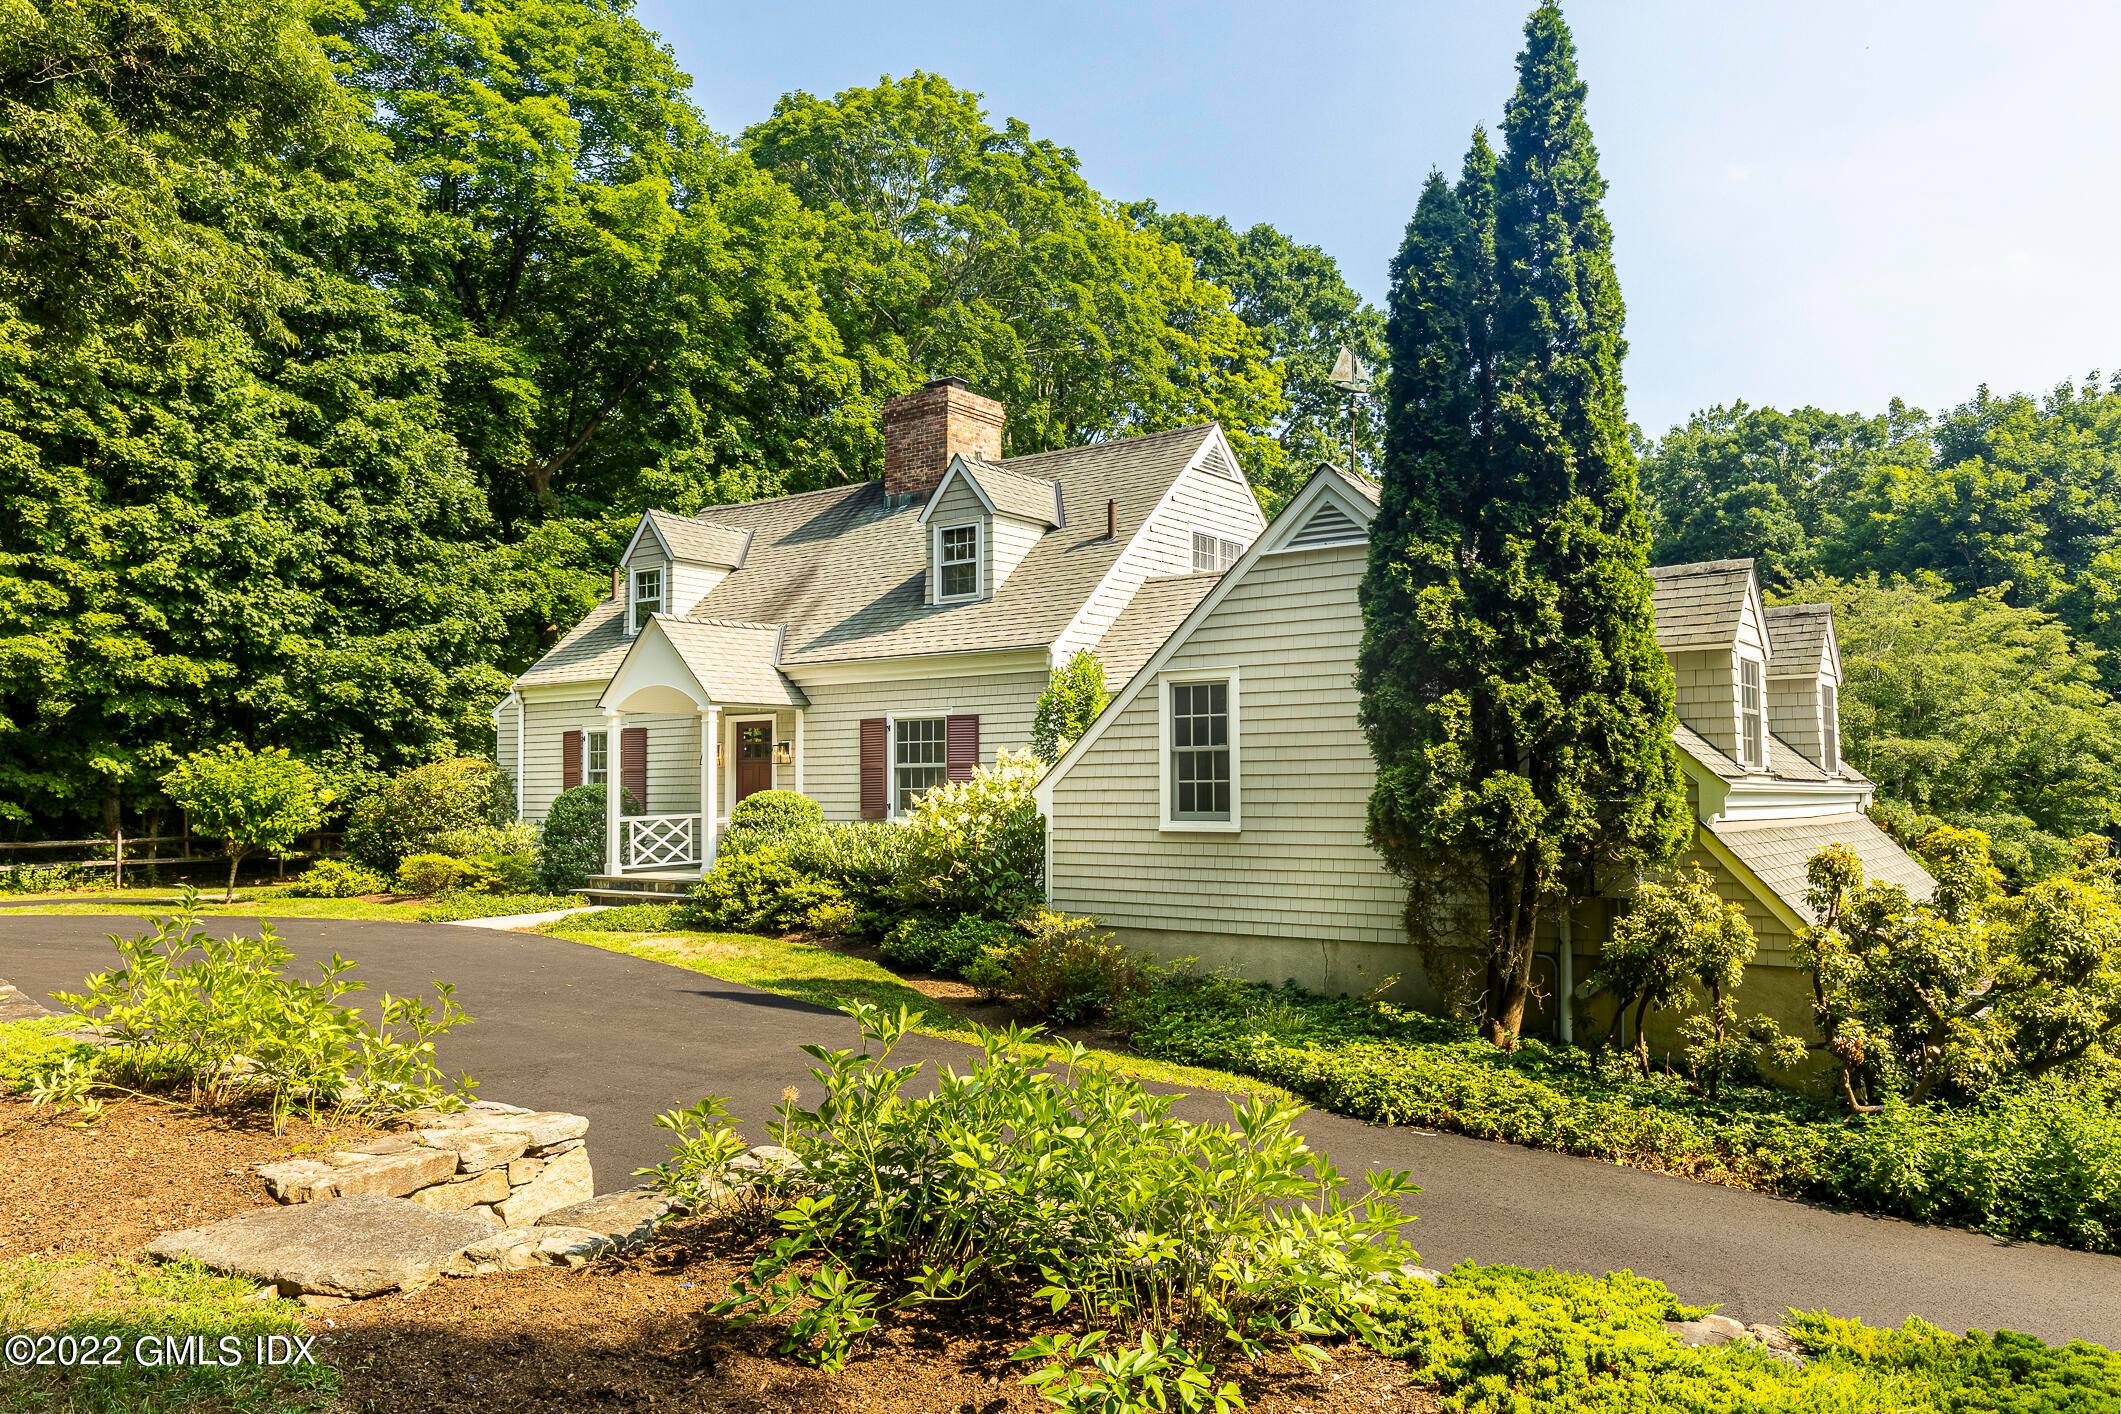 In a delightful residential neighborhood of Central Greenwich, this expanded cape cod house has been lovely cared for and updated.